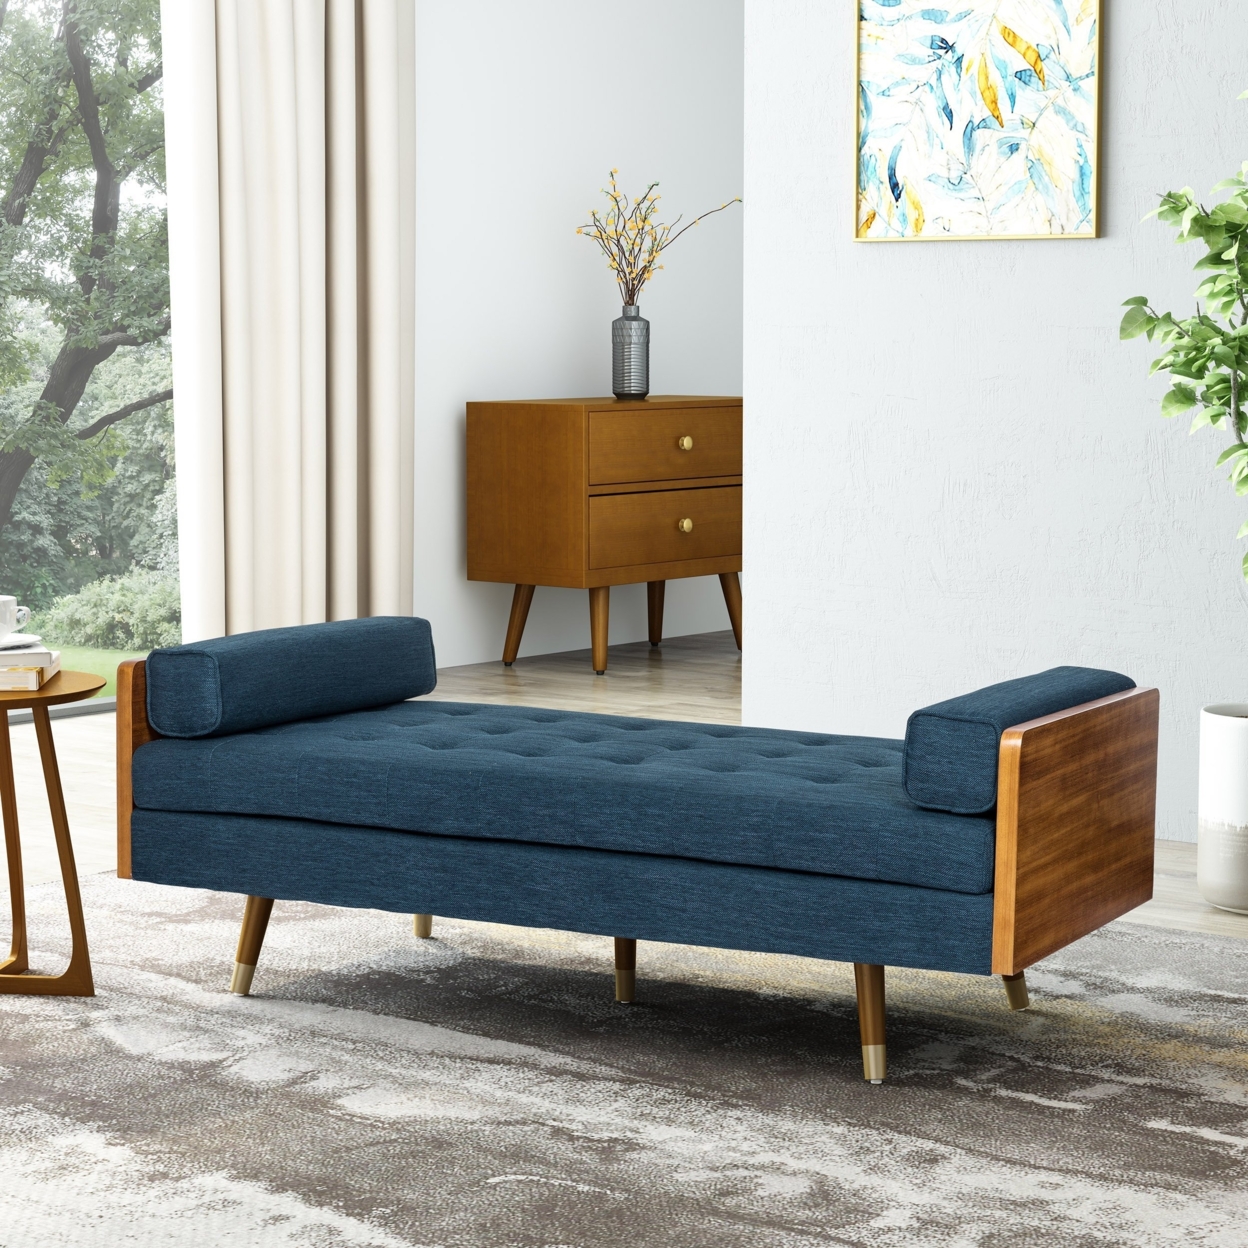 Tiltonsville Mid-Century Modern Tufted Double End Chaise Lounge With Bolster Pillows - Dark Walnut With Golden/navy Blue